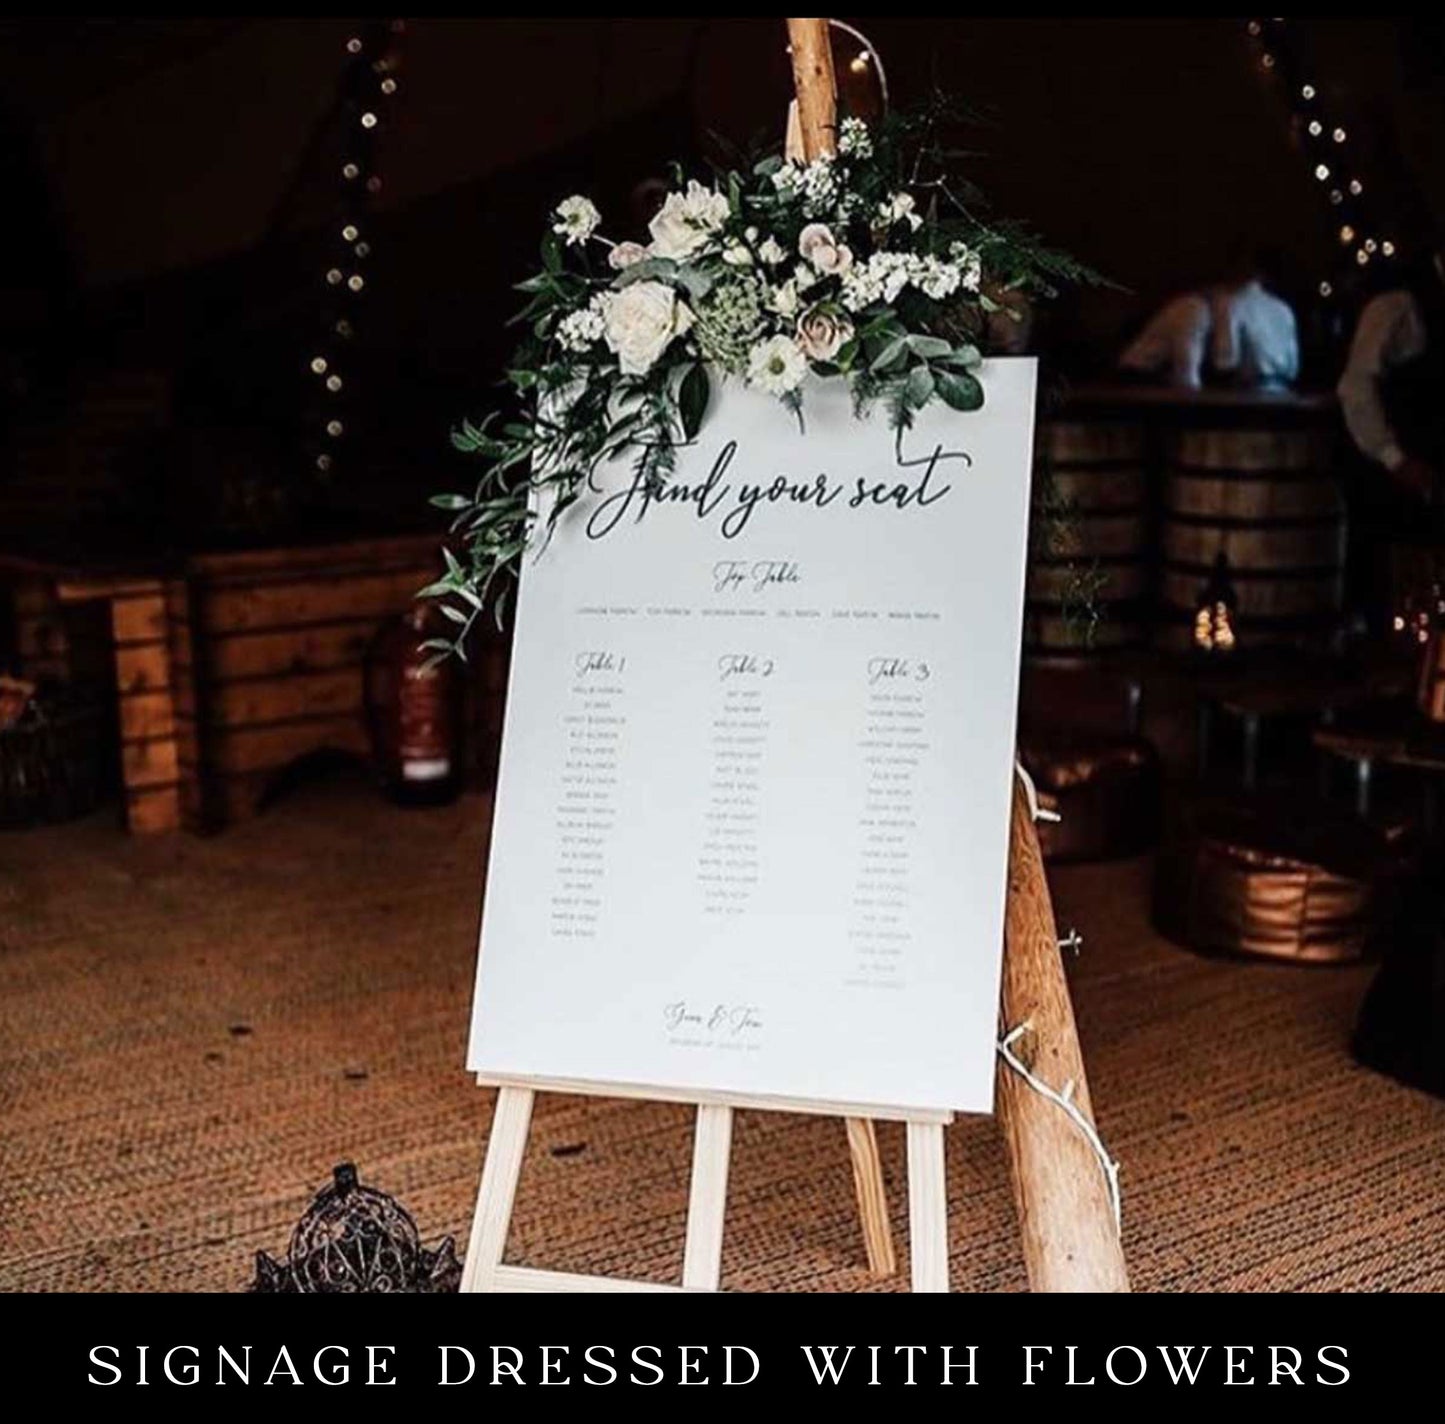 Laura | Tarot Seating Plan - Ivy and Gold Wedding Stationery